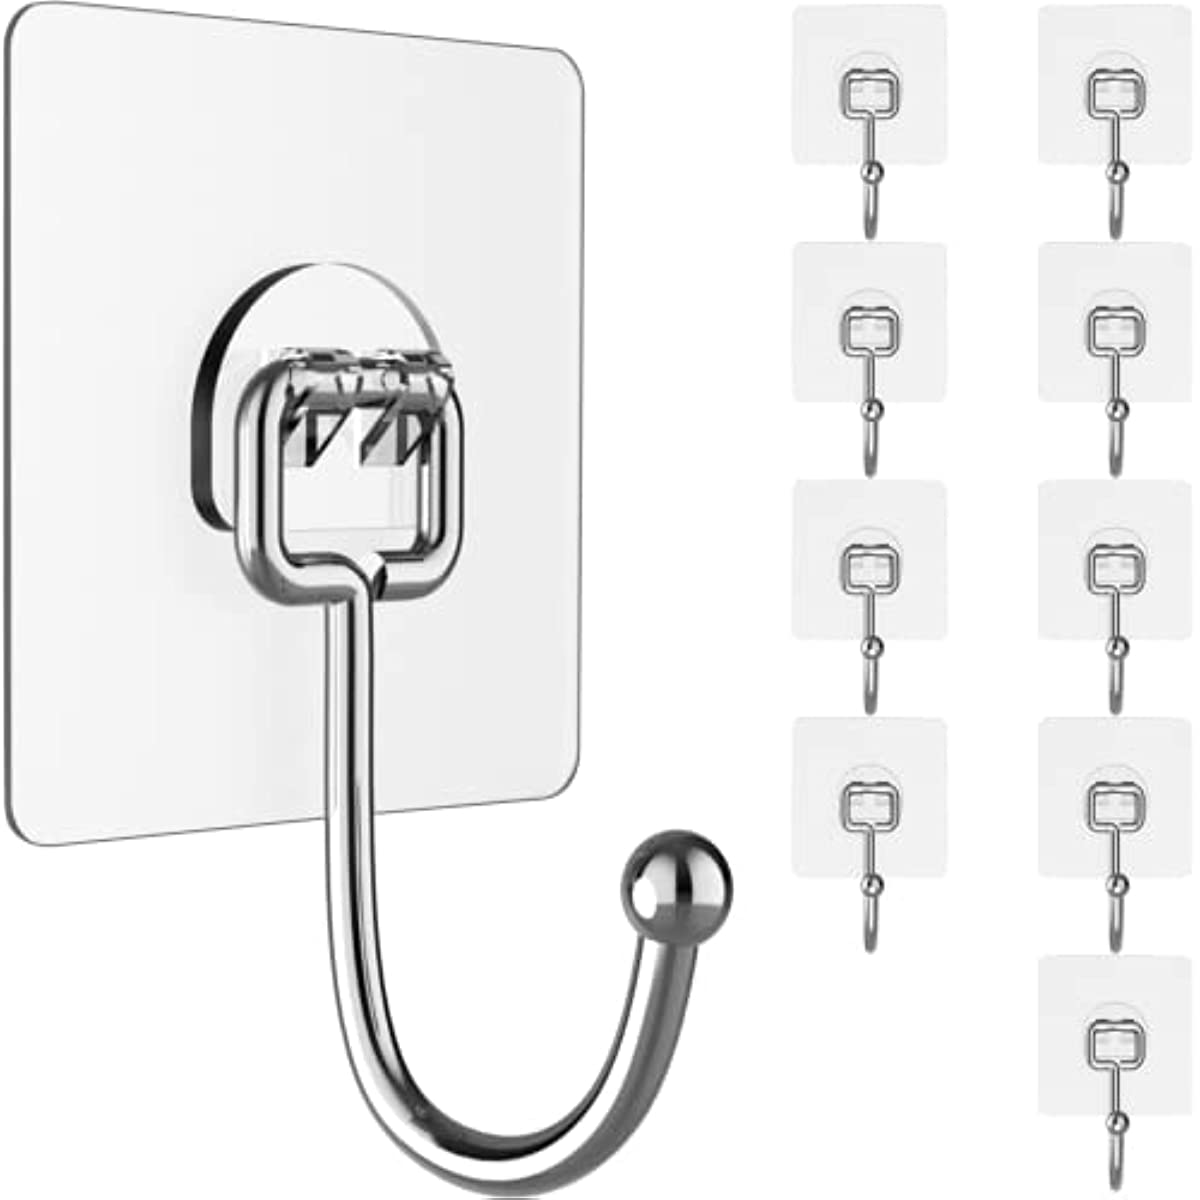 FUNOMOCYA 20pcs No Trace Hook self Adhesive Hooks Adhesive Wall Hooks Wall  Sticky for Hanging Adhesive Hooks Heavy Duty Sticky Hangers Bathroom Wall